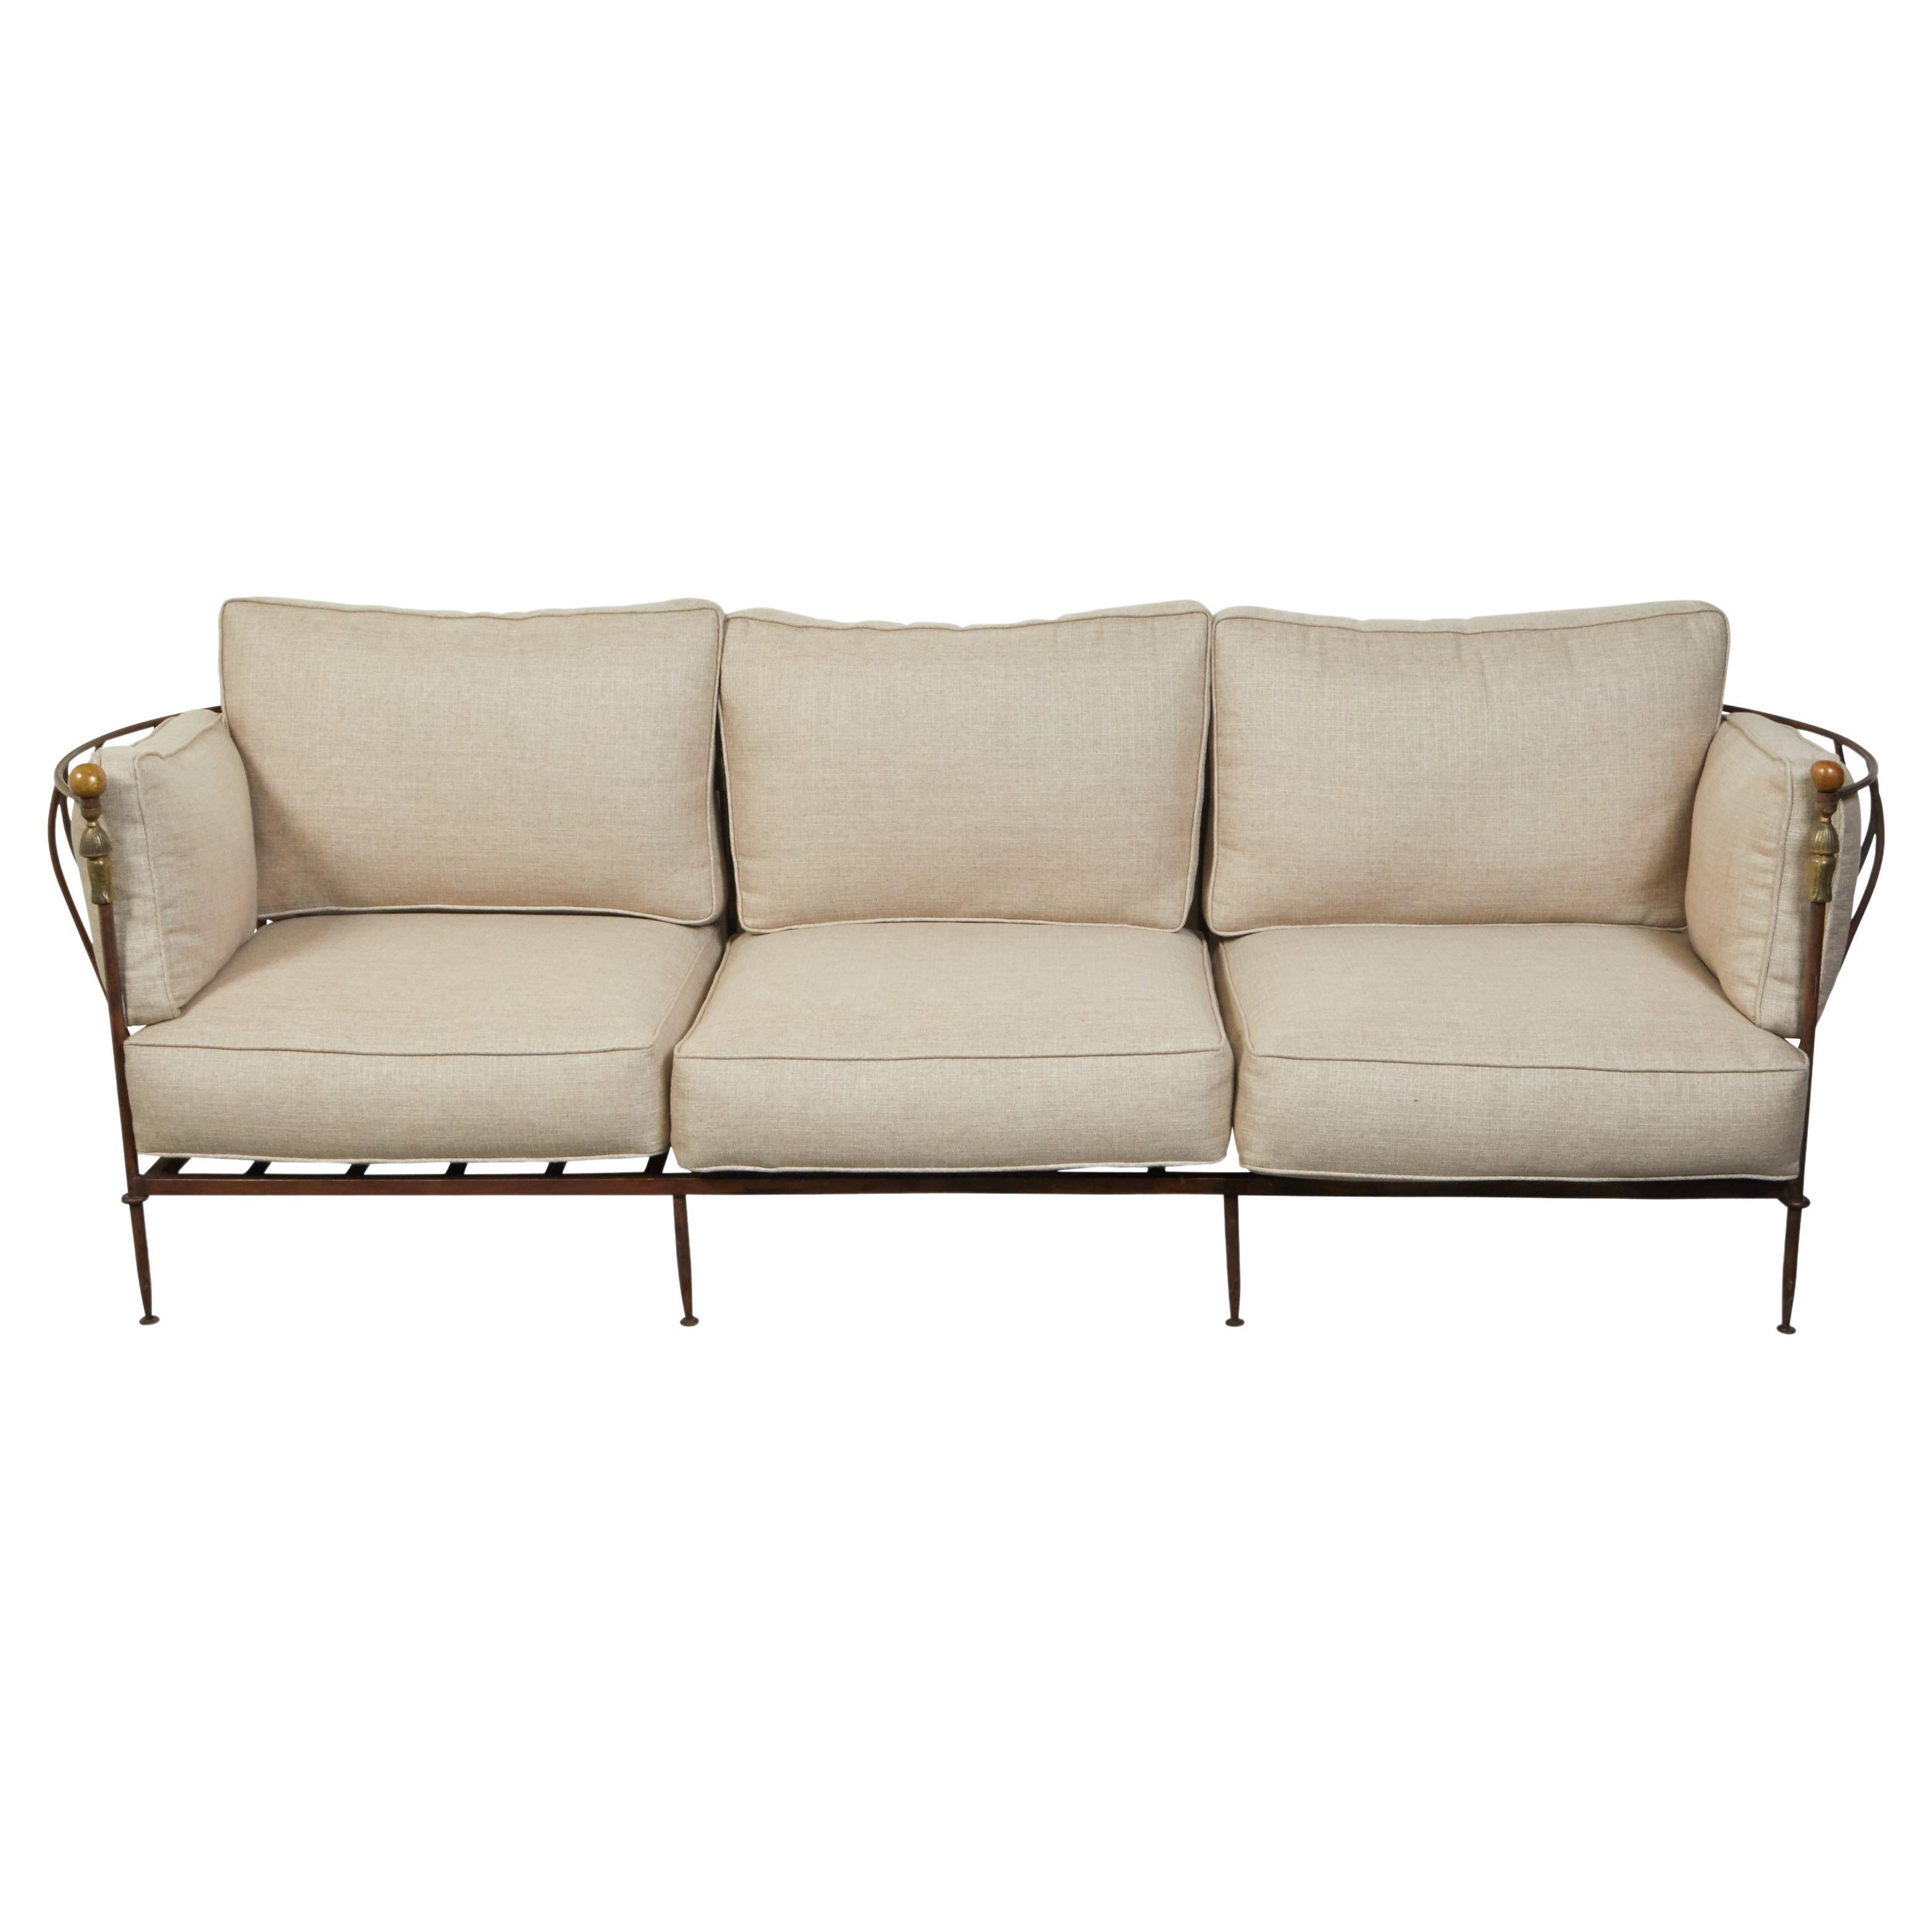 Steel and Brass Mid-Century Michael Taylor Three-Seat Sofa with Linen Upholstery